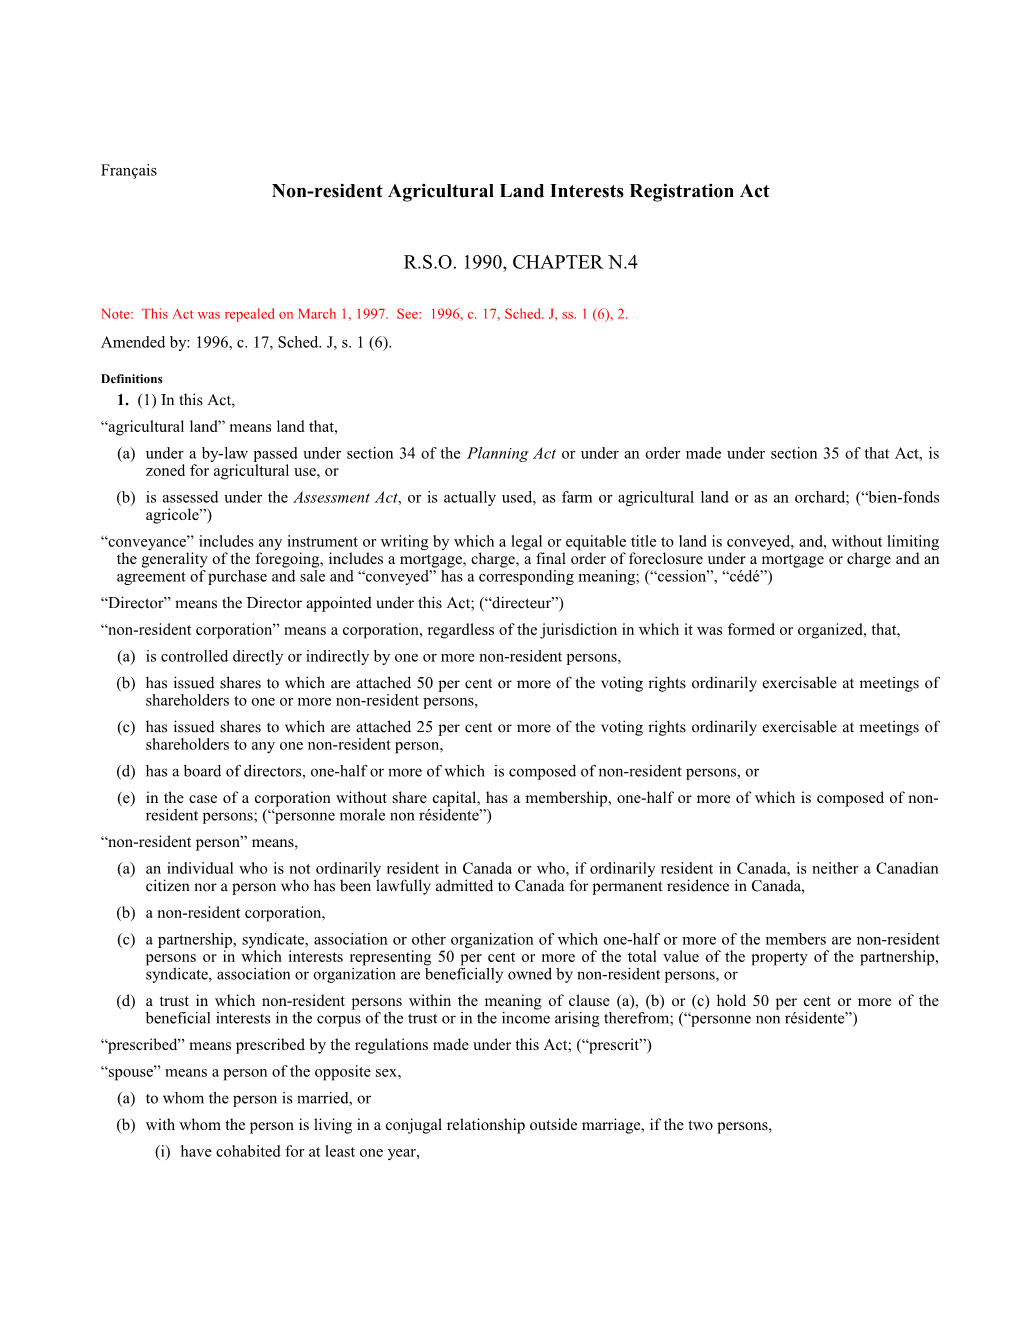 Non-Resident Agricultural Land Interests Registration Act, R.S.O. 1990, C. N.4